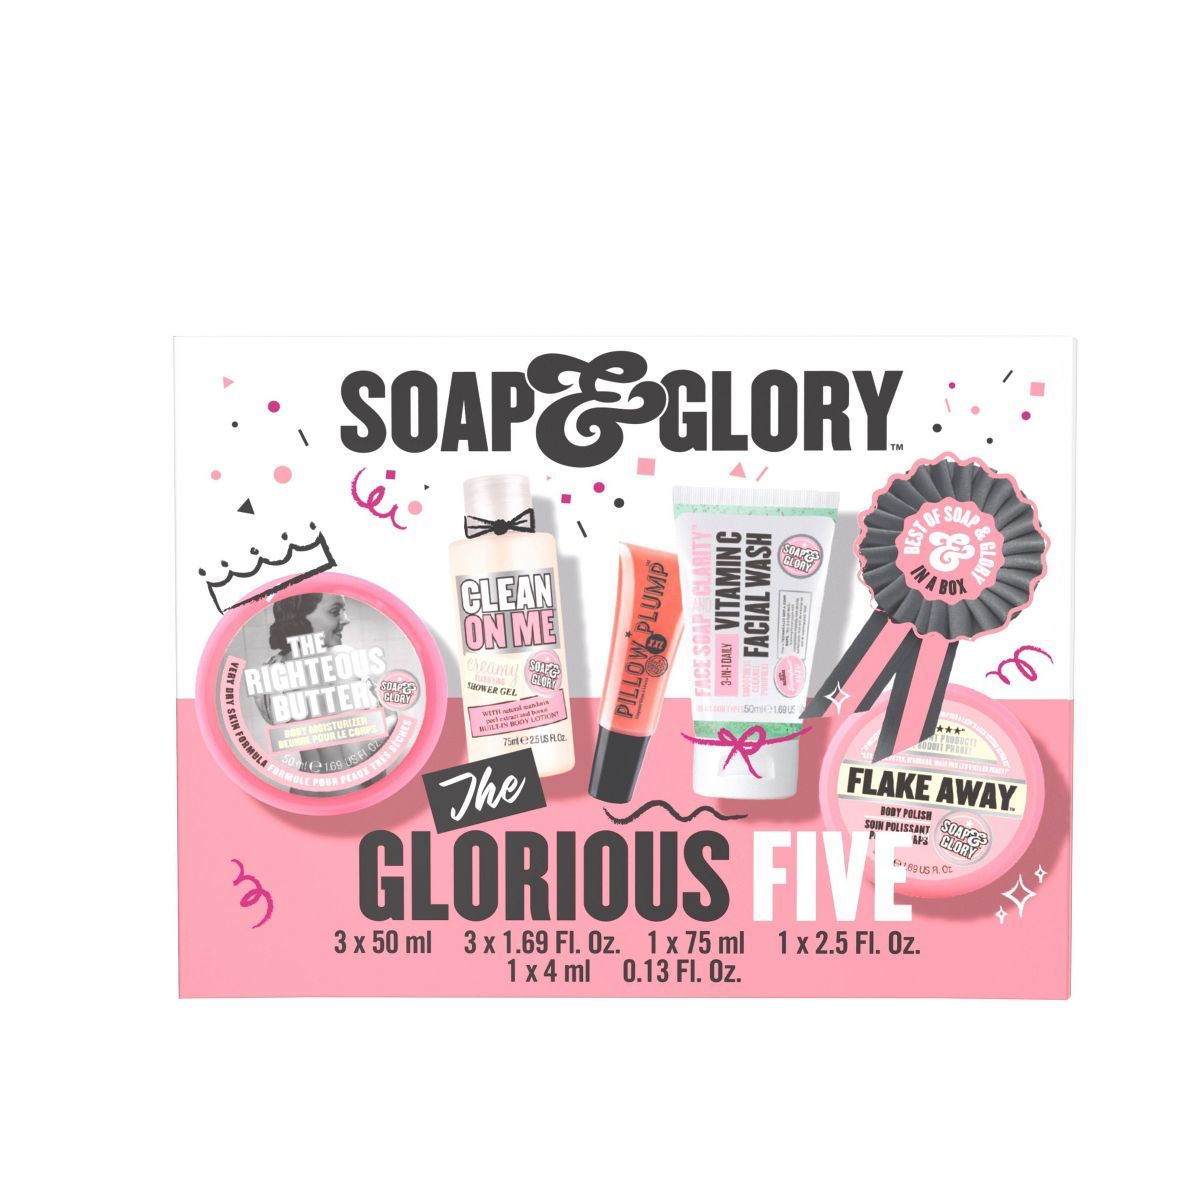 Soap & Glory The Glorious Five Gift Set - 5ct | Target